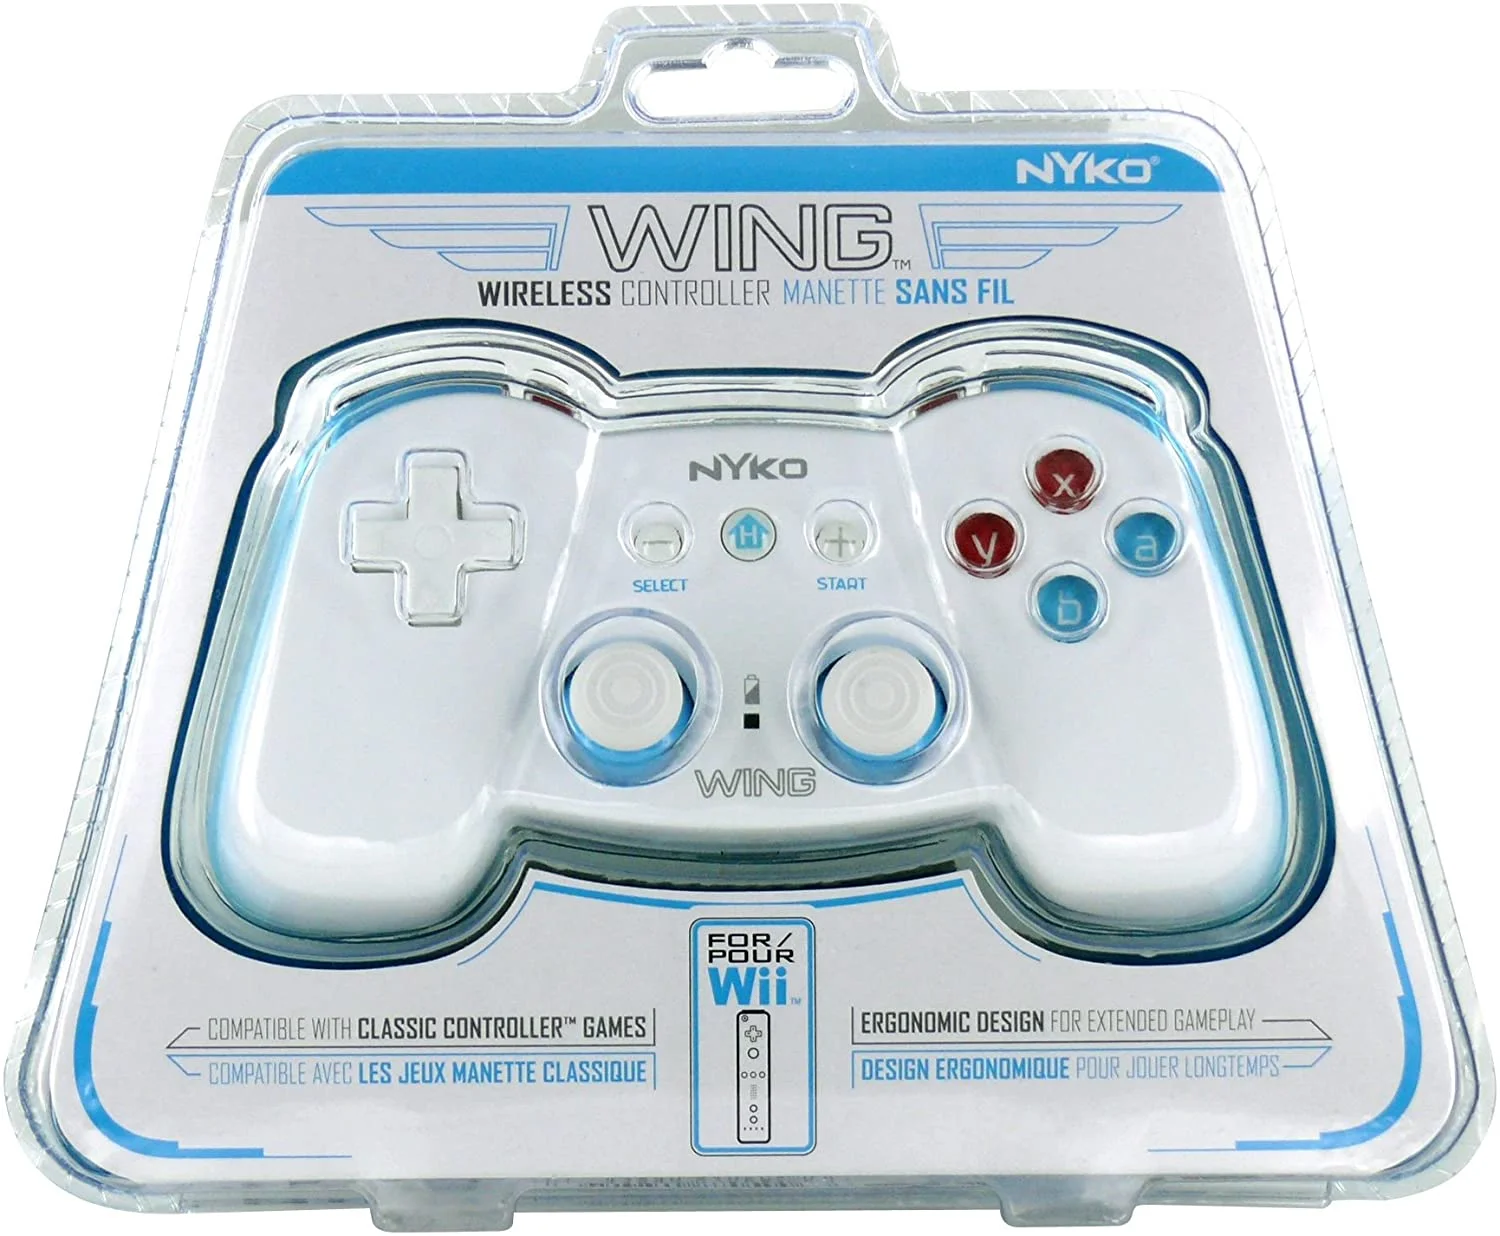  Nyko Wii Wing Wireless Controller